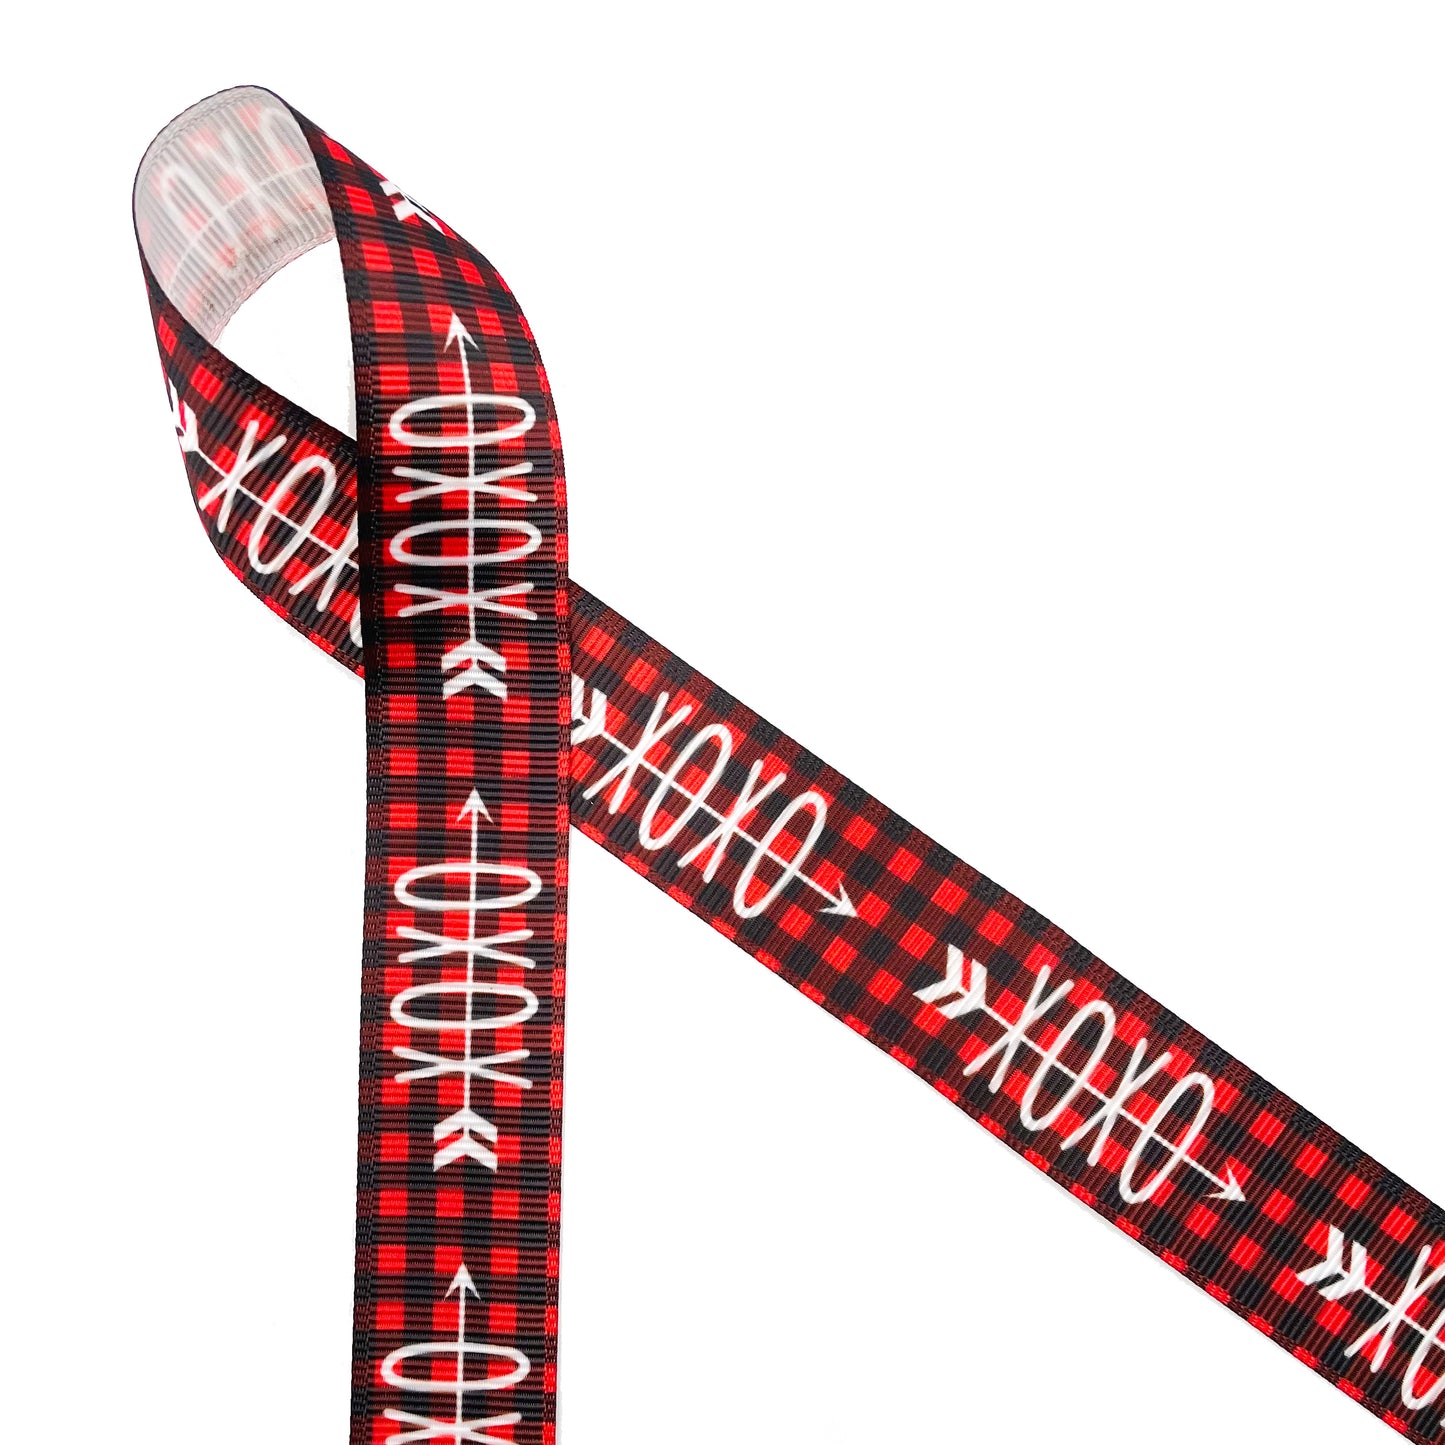 Valentine X's and O's in white on a red and black buffalo plaid background printed on 7/8" white single face satin and grosgrain